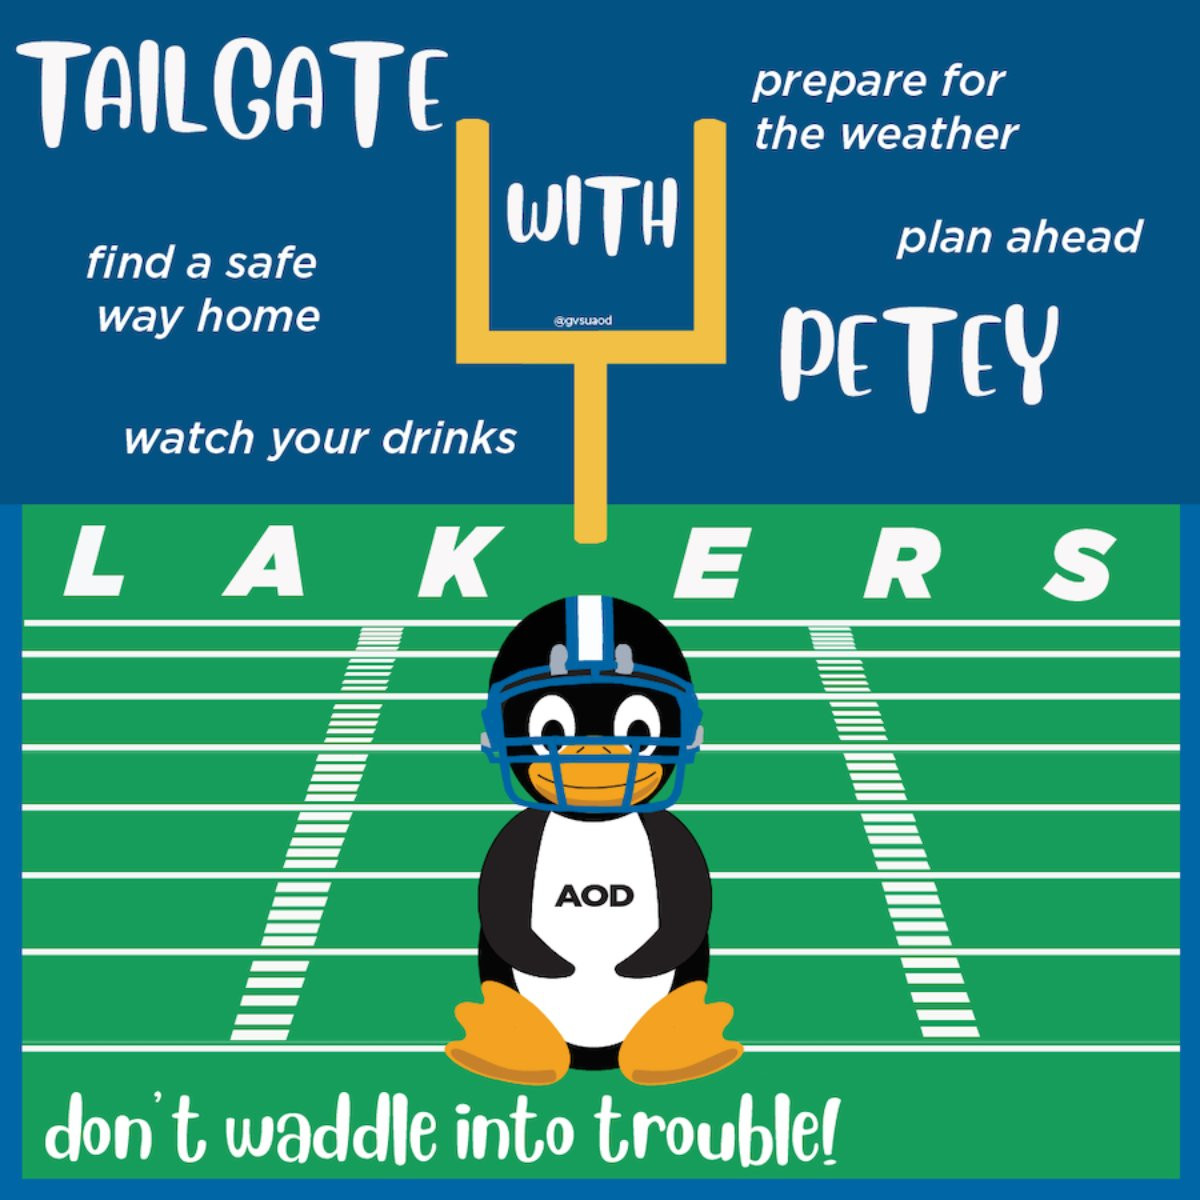 a penguin wearing a football hat on a field and has text: tailgating with petey, prepare for the weather, plan ahead, find a safe way home, watch your drinks and don't waddle into trouble!